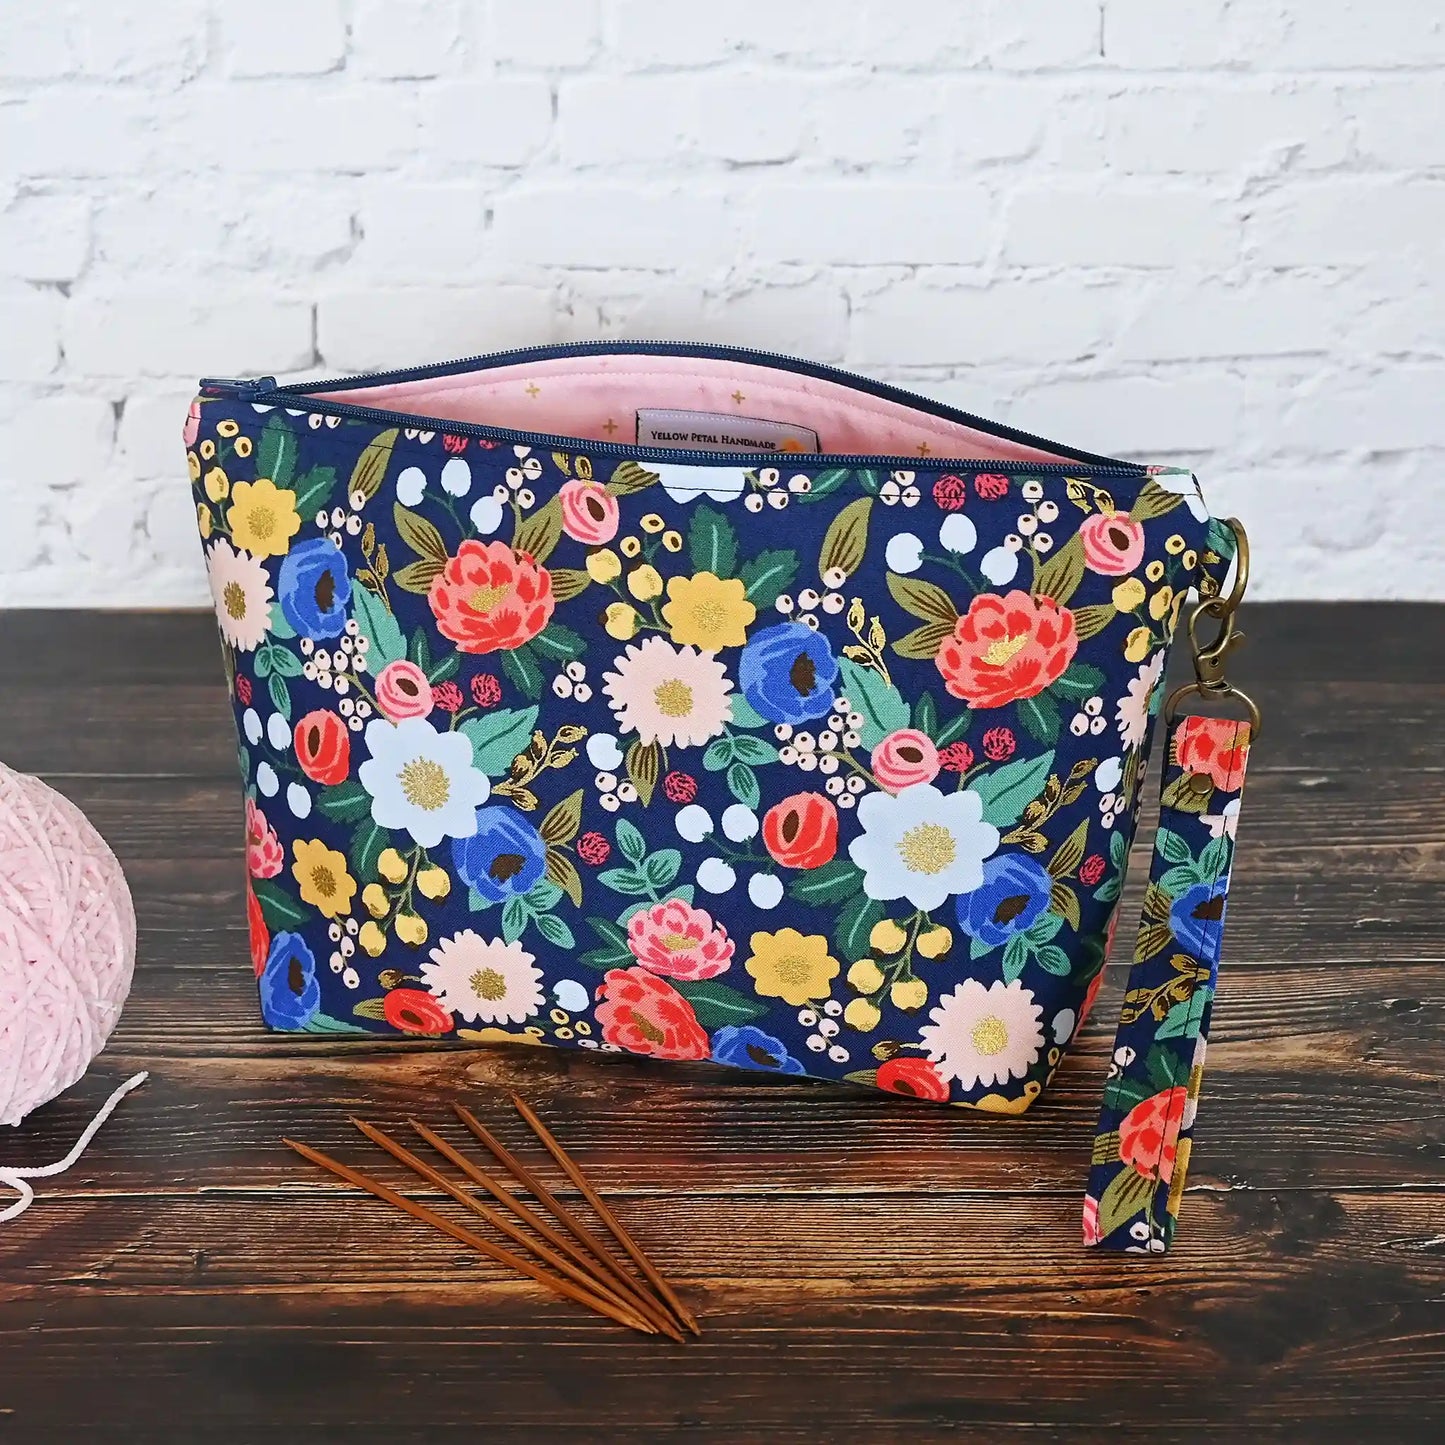 Pretty navy floral project bag with zipper and wrist strap.  Made from Rifle Paper Co's Antique Garden.  Made in Nova Scotia, Canada by Yellow Petal Handmade.